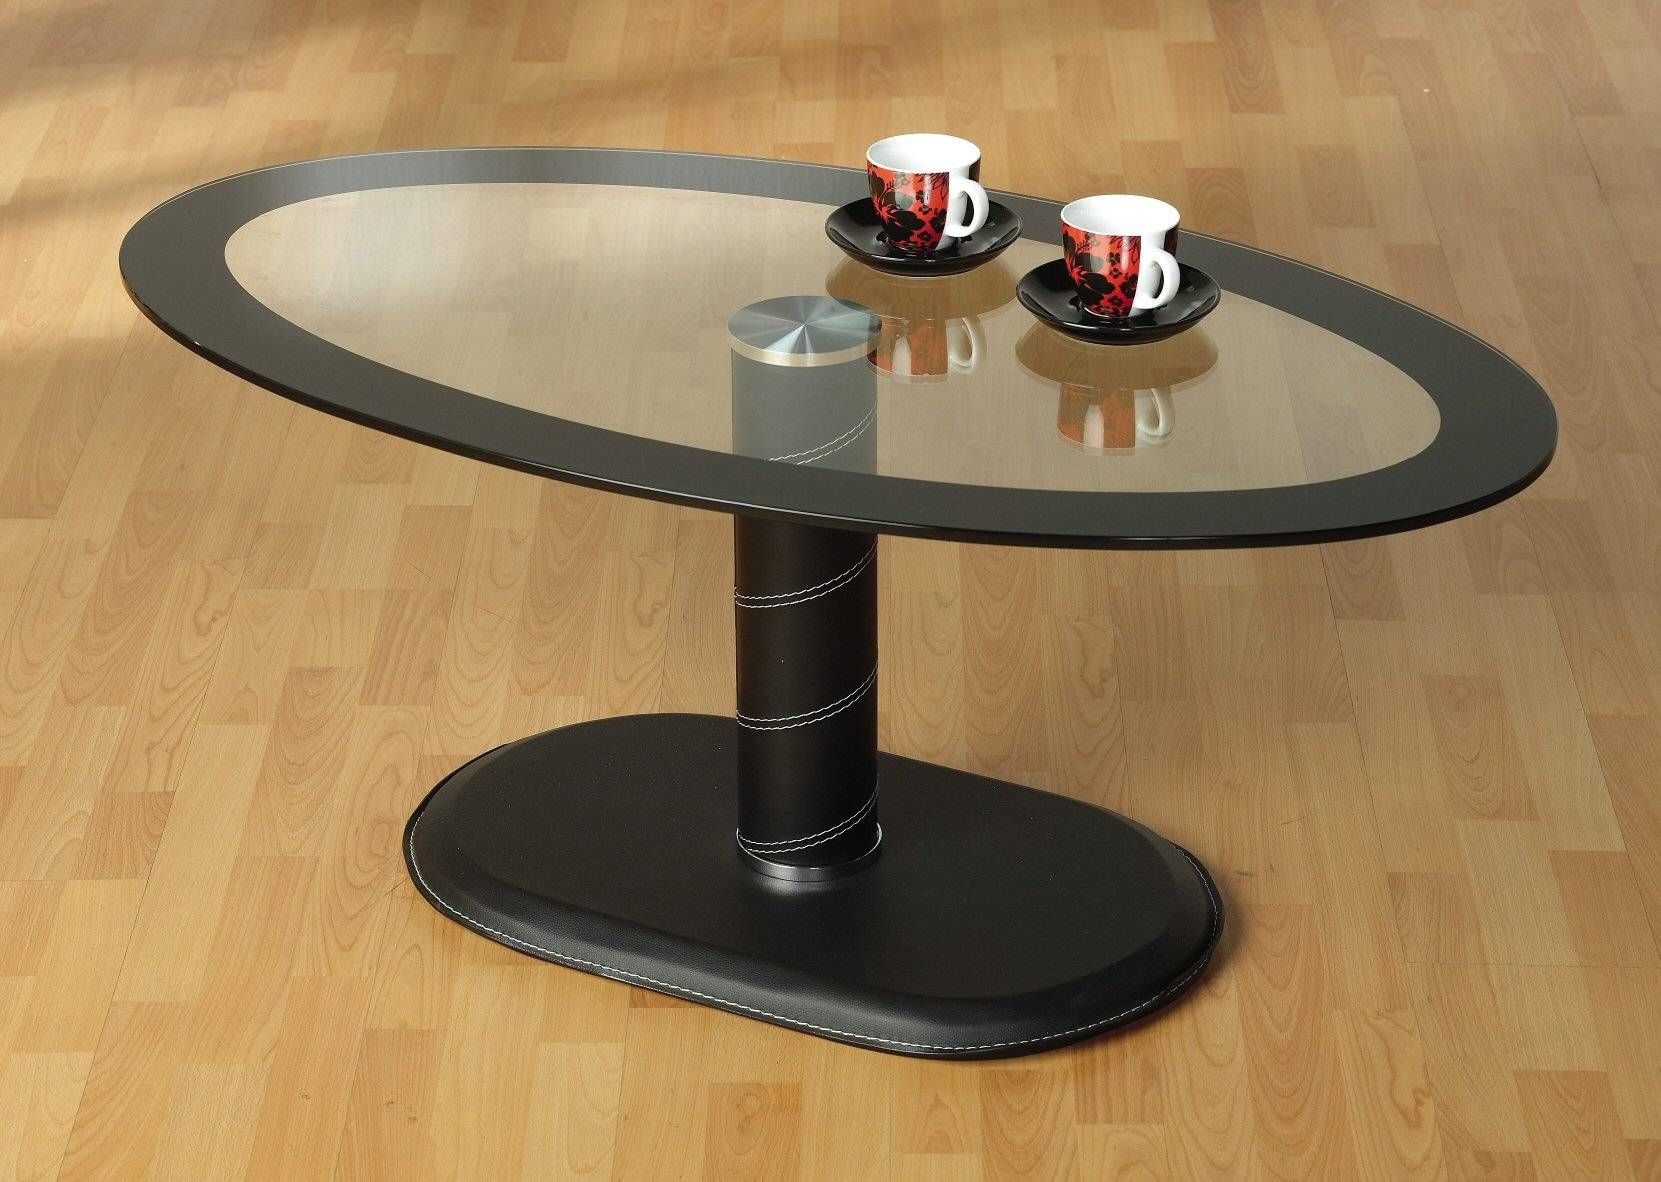 Furniture: Small Oval Coffee Table | Target Living Room Tables With Regard To Black Oval Coffee Tables (View 14 of 30)